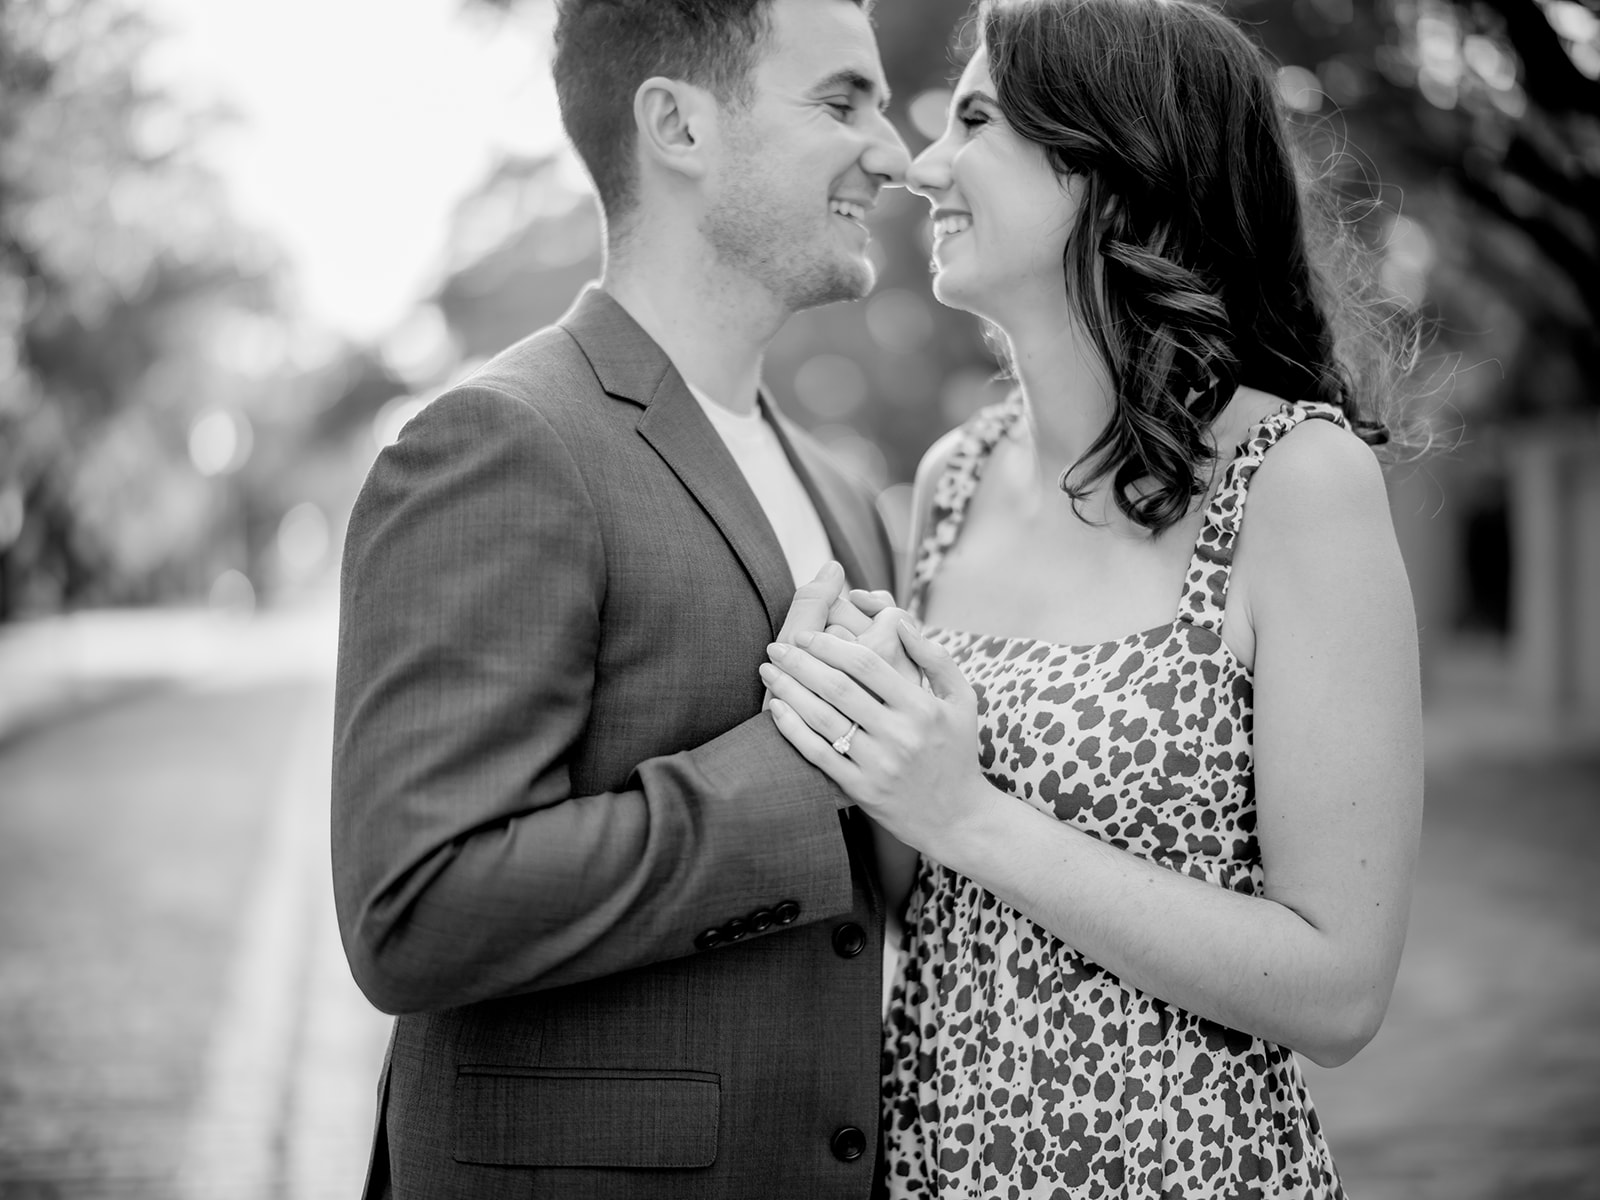 professional-engagement-session-around-Ybor-City-Downtown-Tampa